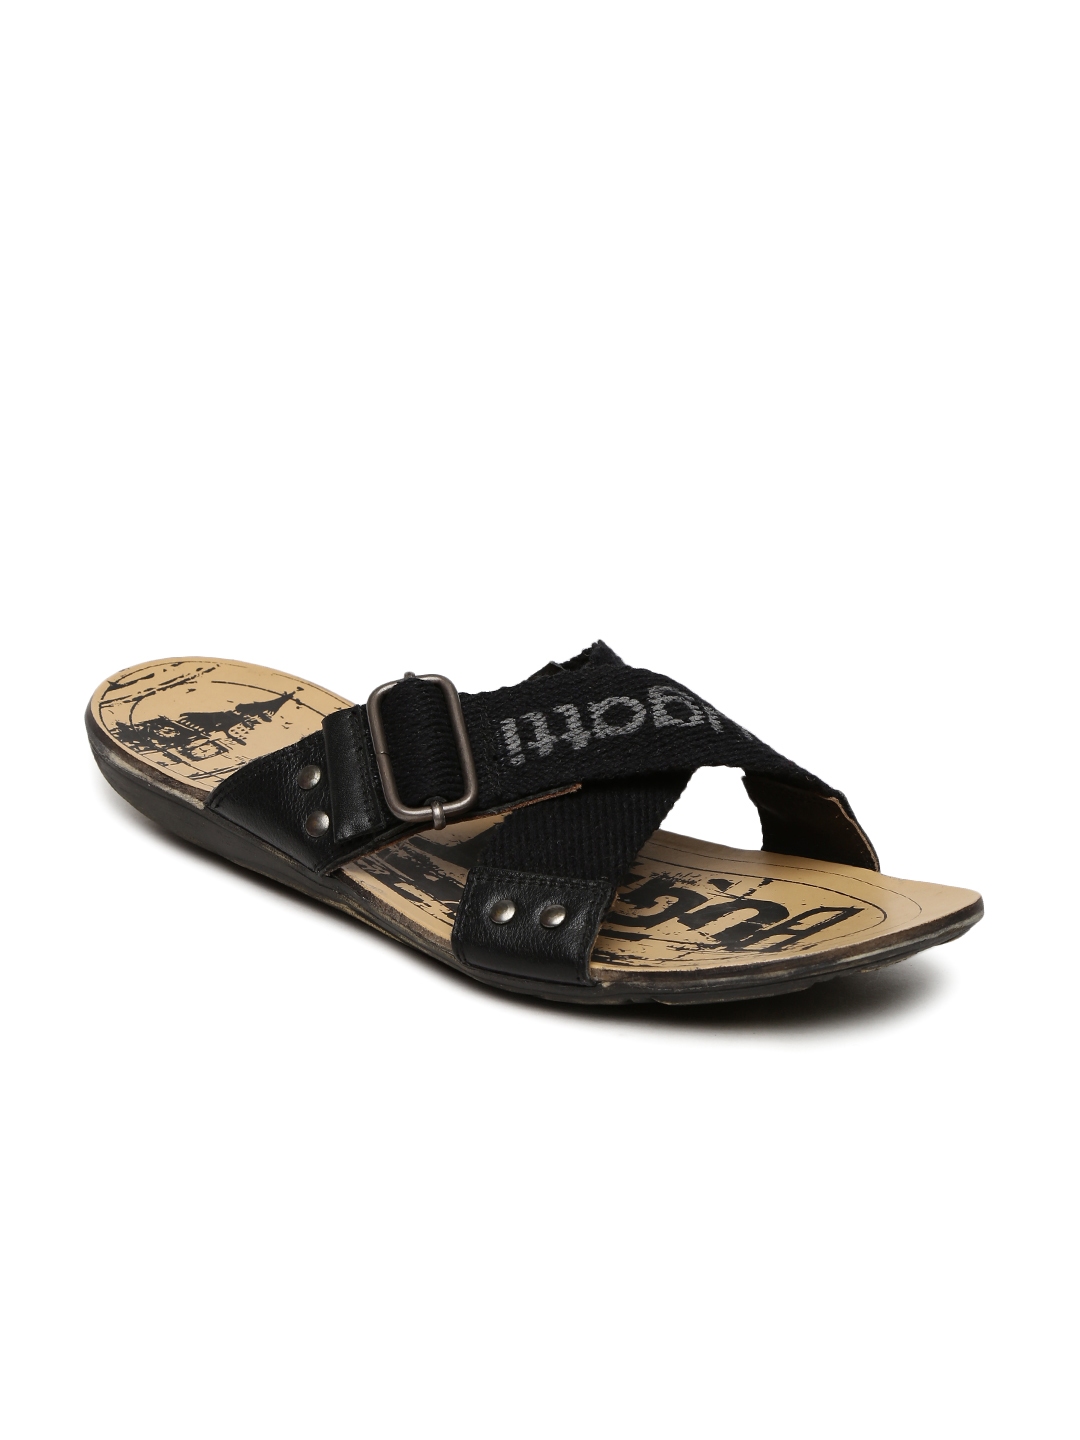 Mens printed LBW Rubber slippers, and goa trip hawai chappal, Men's Casual Flip  Flops Slipper/Chappal, Gents Relaxed Fashionable Thong Flipflop,  Comfortable Light Weight footwear for daily use